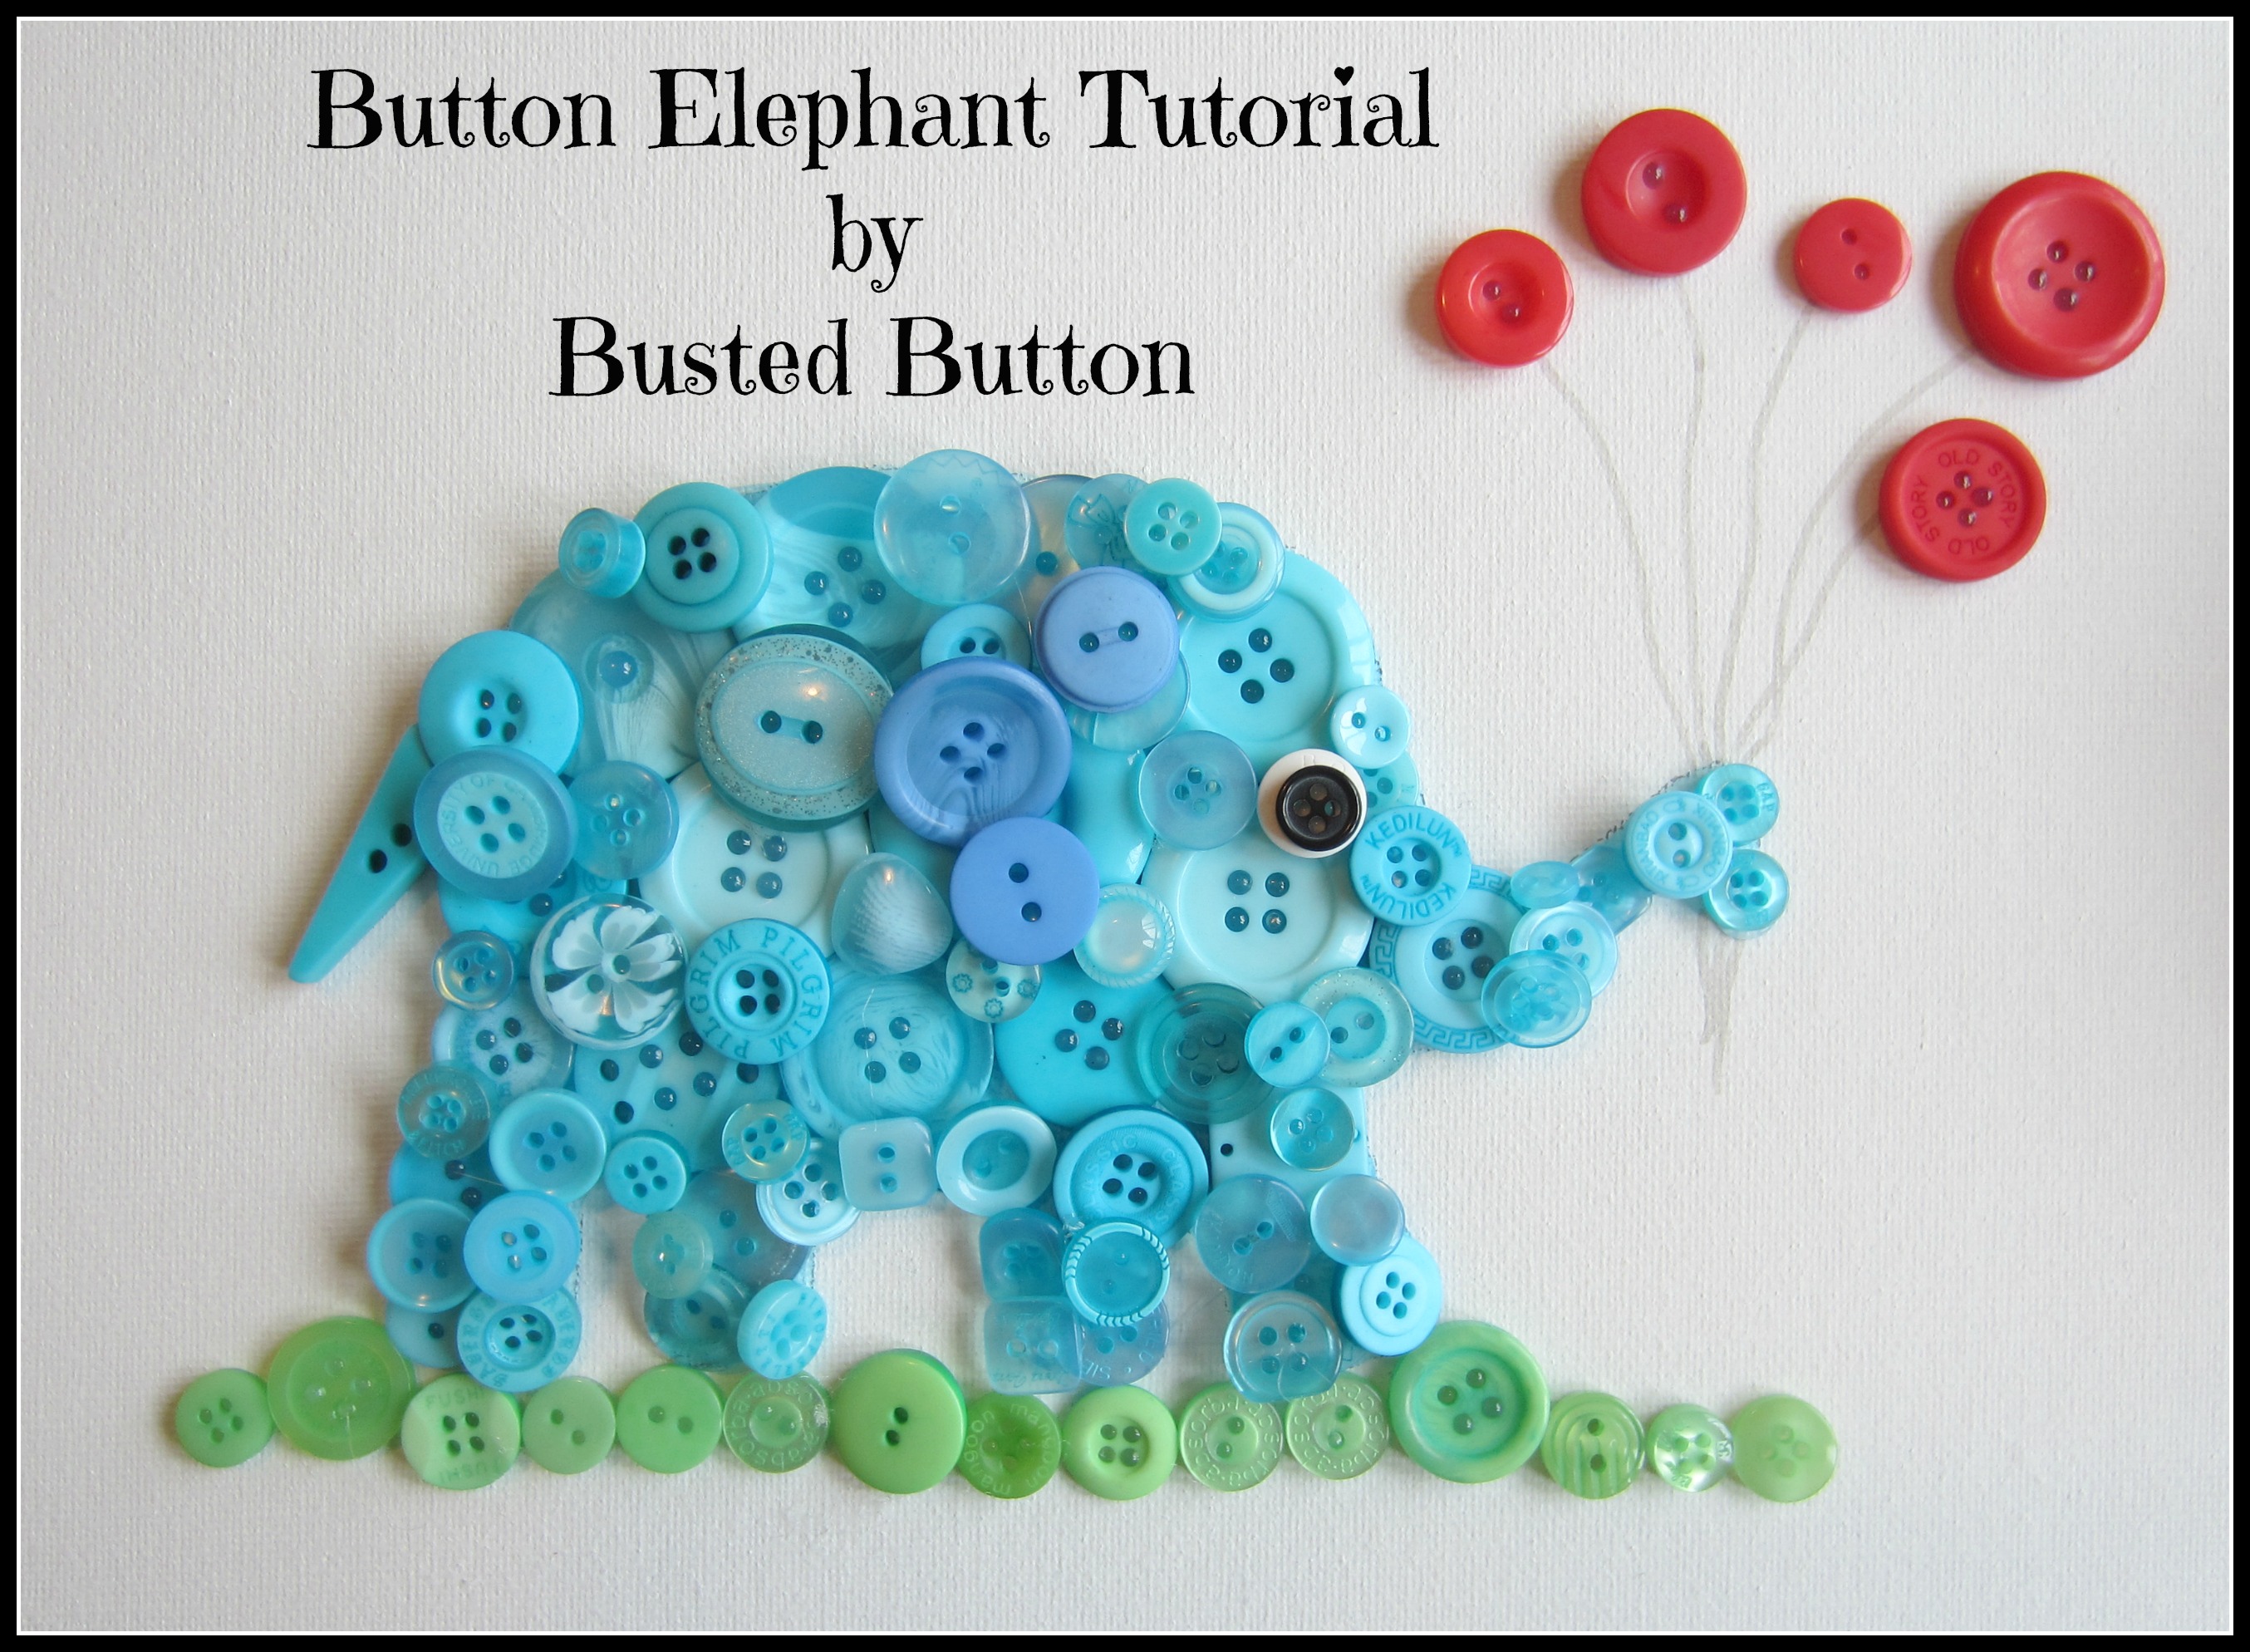 Button) Elephant in the Room-Tutorial